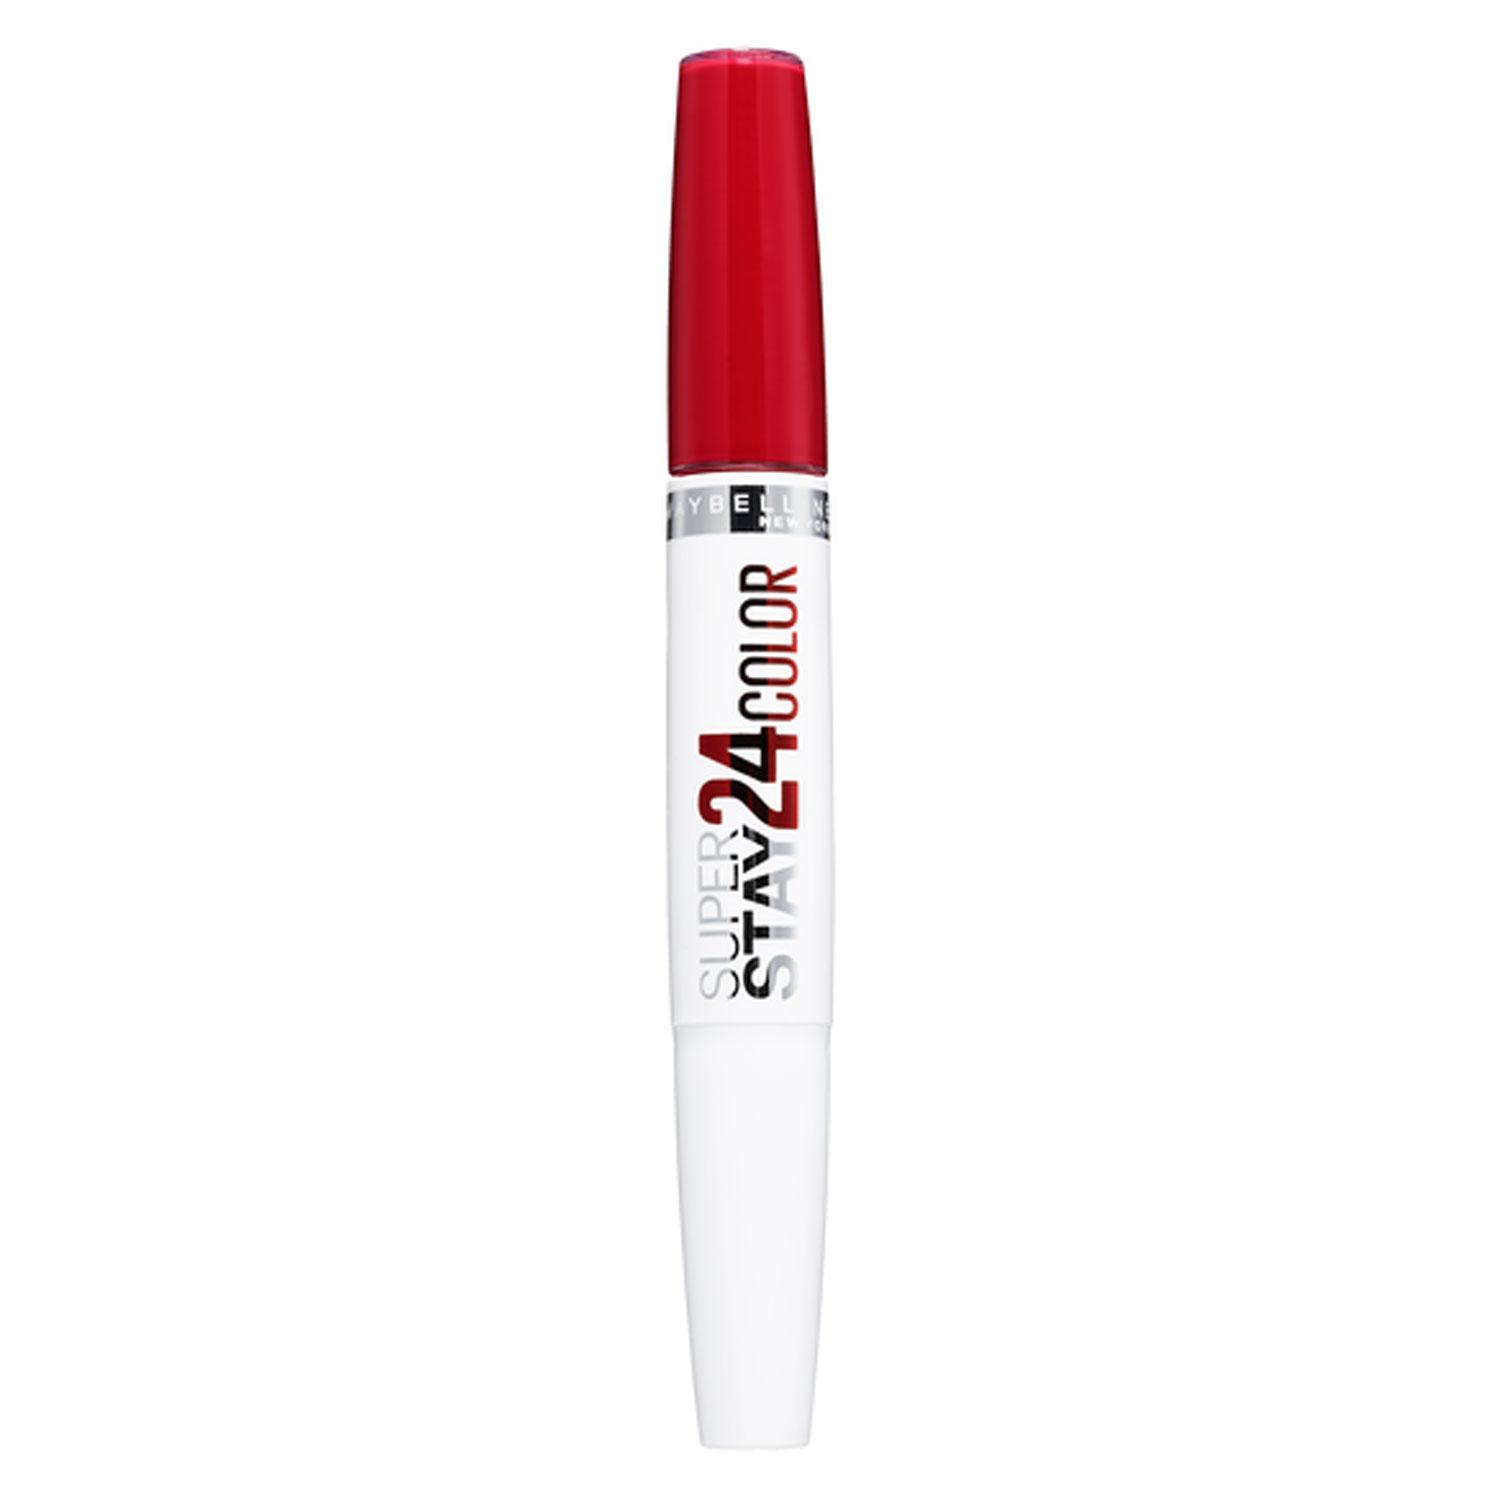 Maybelline NY Lips - Super Stay 24H Lippenstift Nr. 553 Steady Read-Y